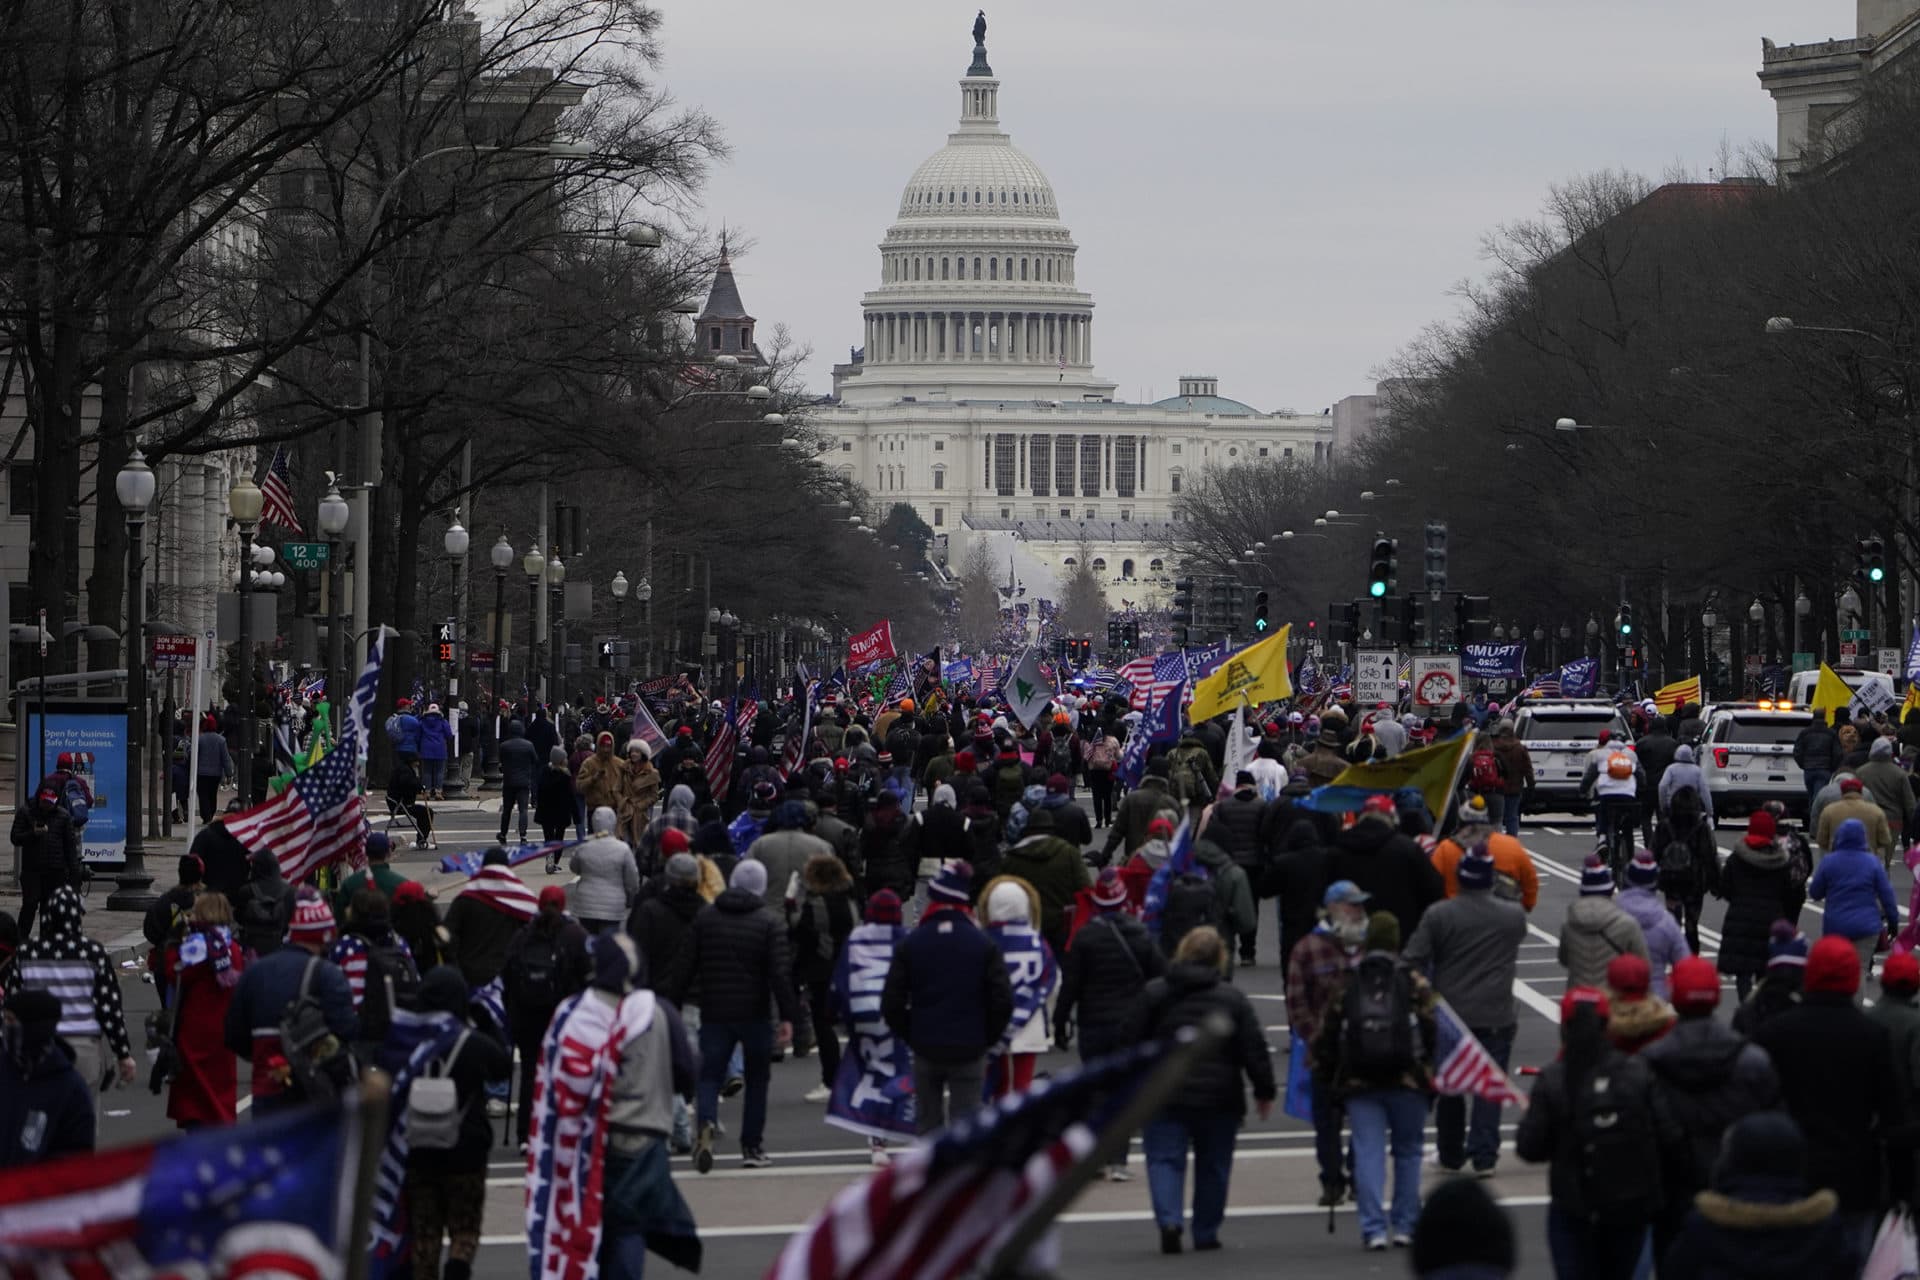 Supporters of President Trump march on Pennsylvania Avenue toward the U.S. Capitol on Jan. 6, 2021, in Washington. (Jacquelyn Martin/AP)